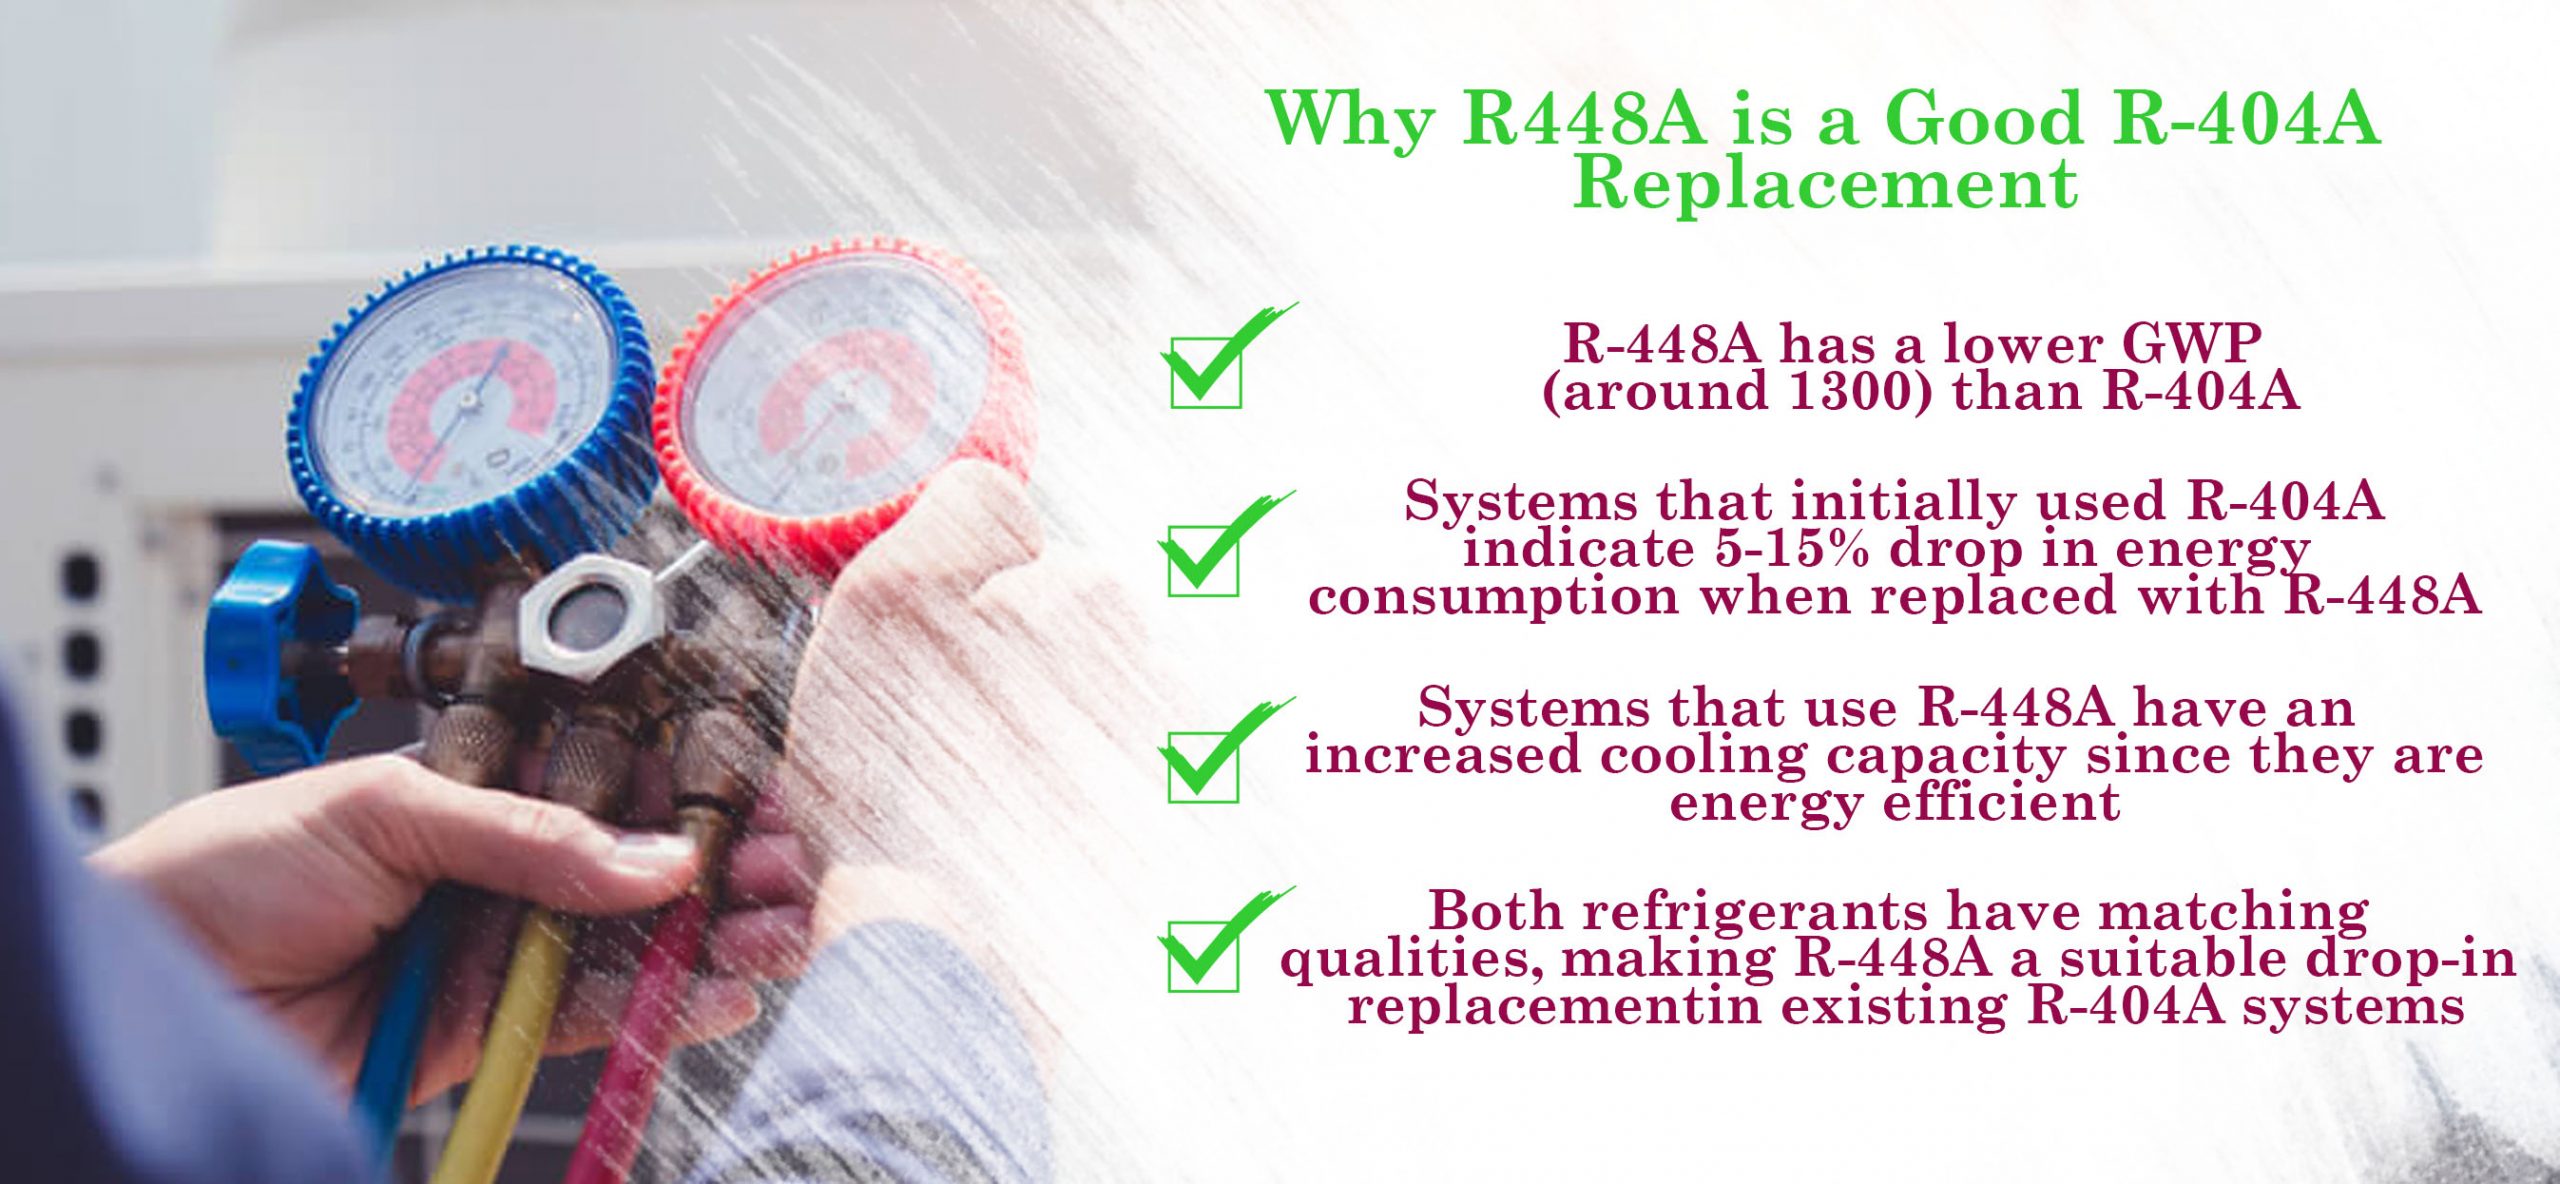 Why R-448A is a Good R-404AReplacement